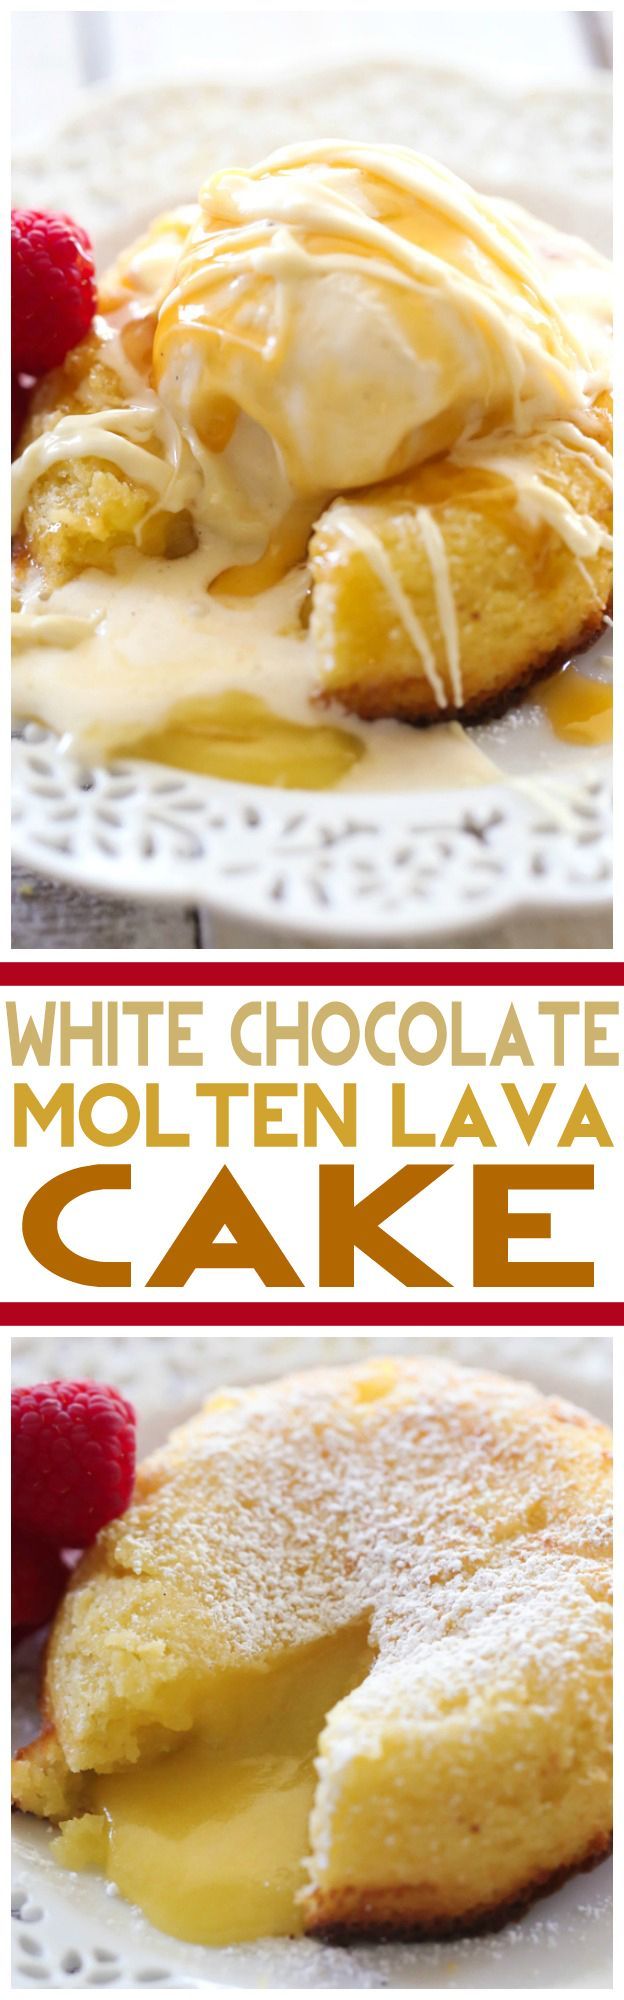 White Chocolate Molten Lava Cake… This cake is truly AMAZING! It is infused with melted goodness in each and every bite. It is